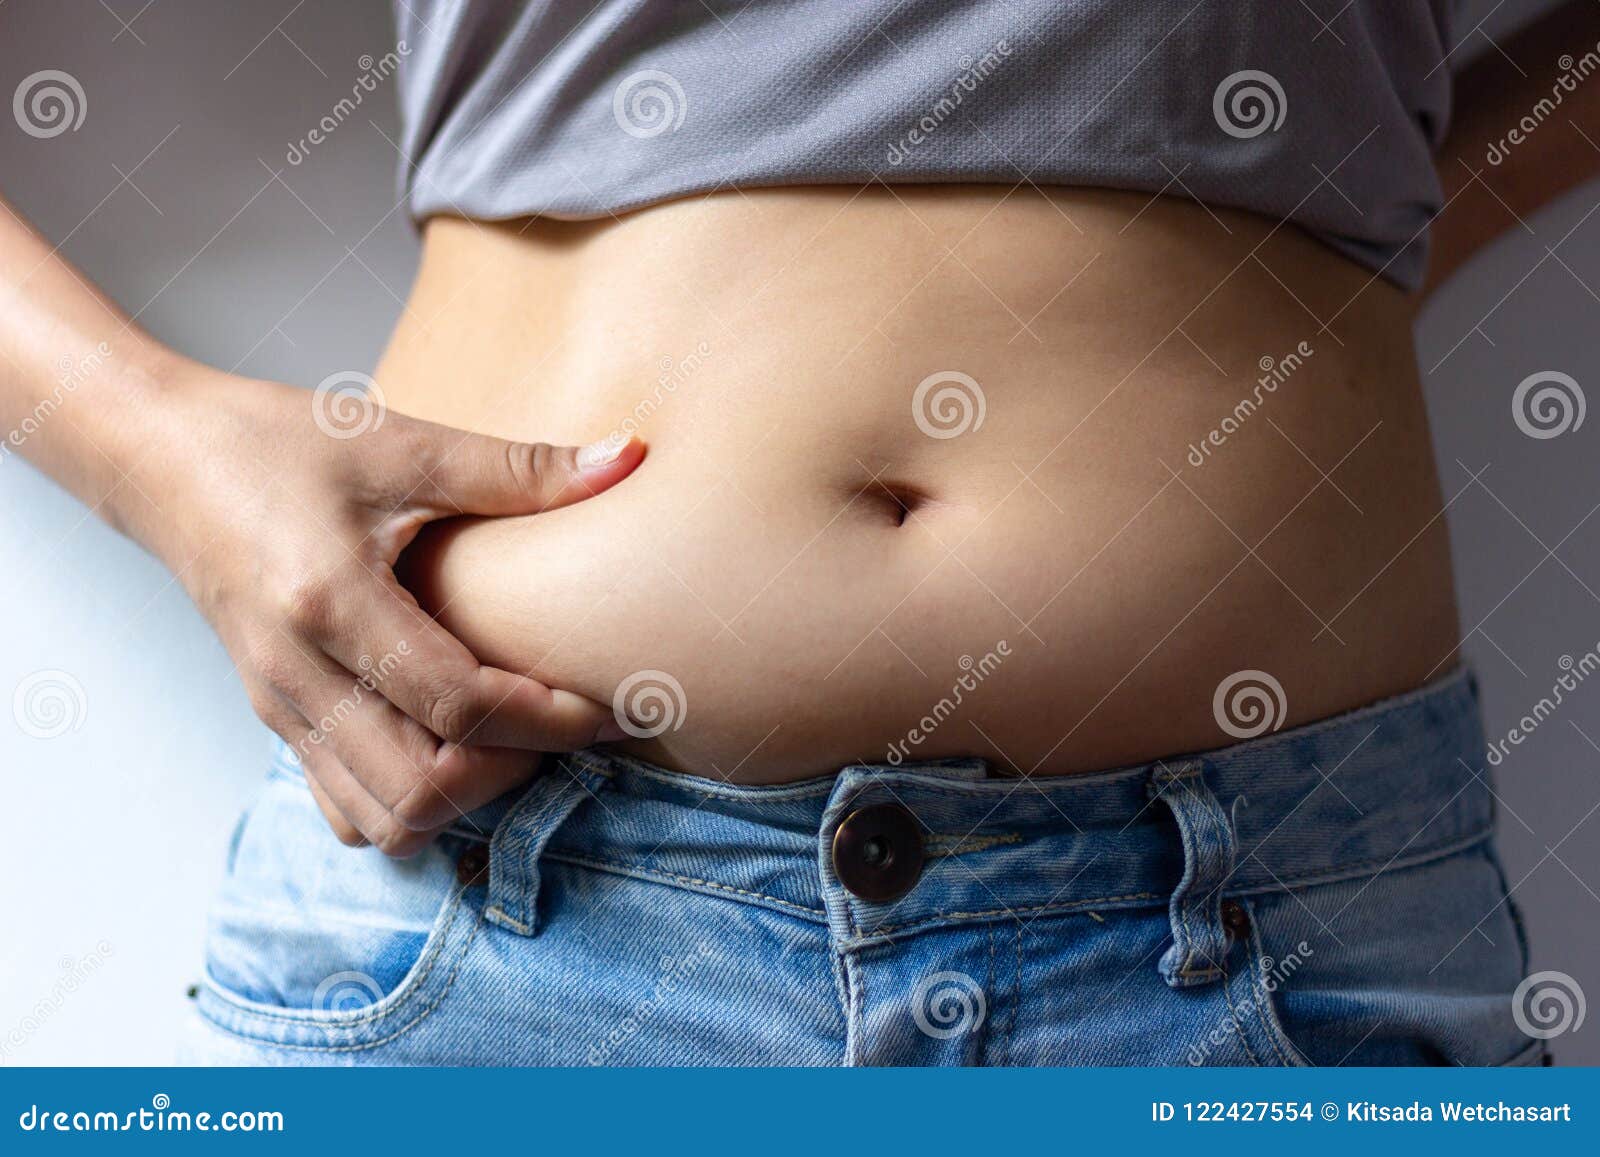 woman with overweight abdomen. hand holding excessive fat belly